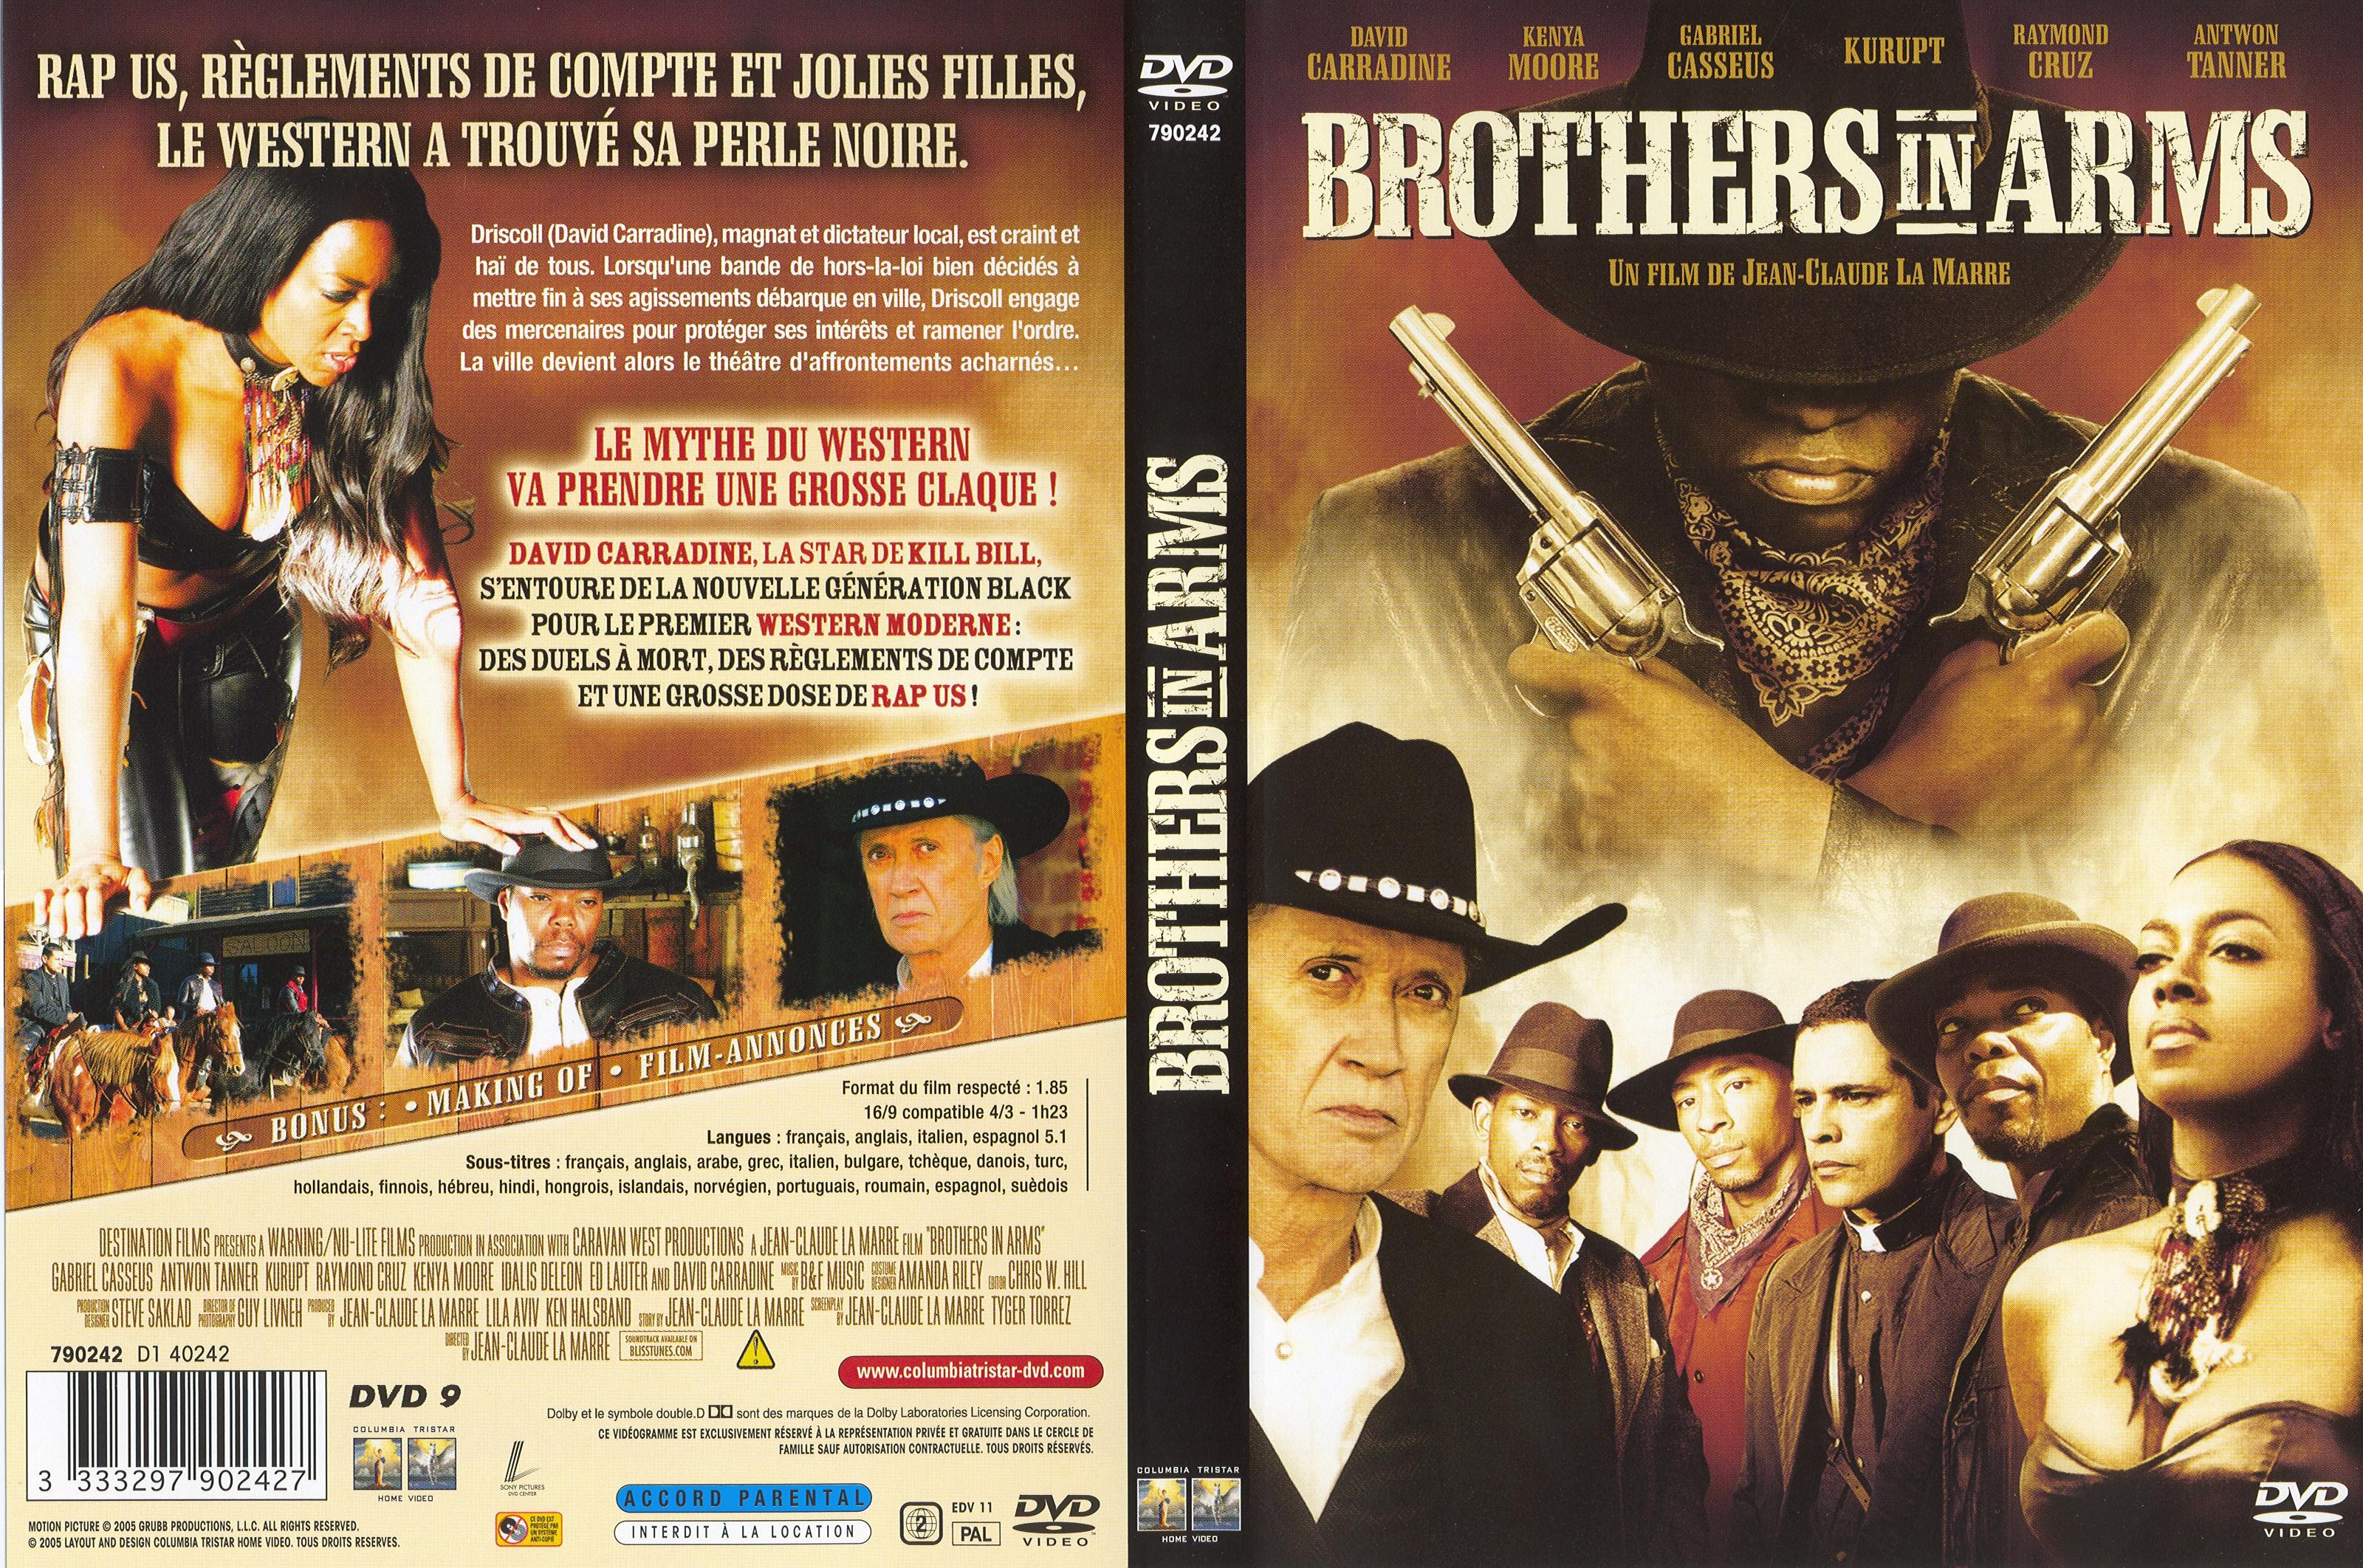 Jaquette DVD Brothers in arms